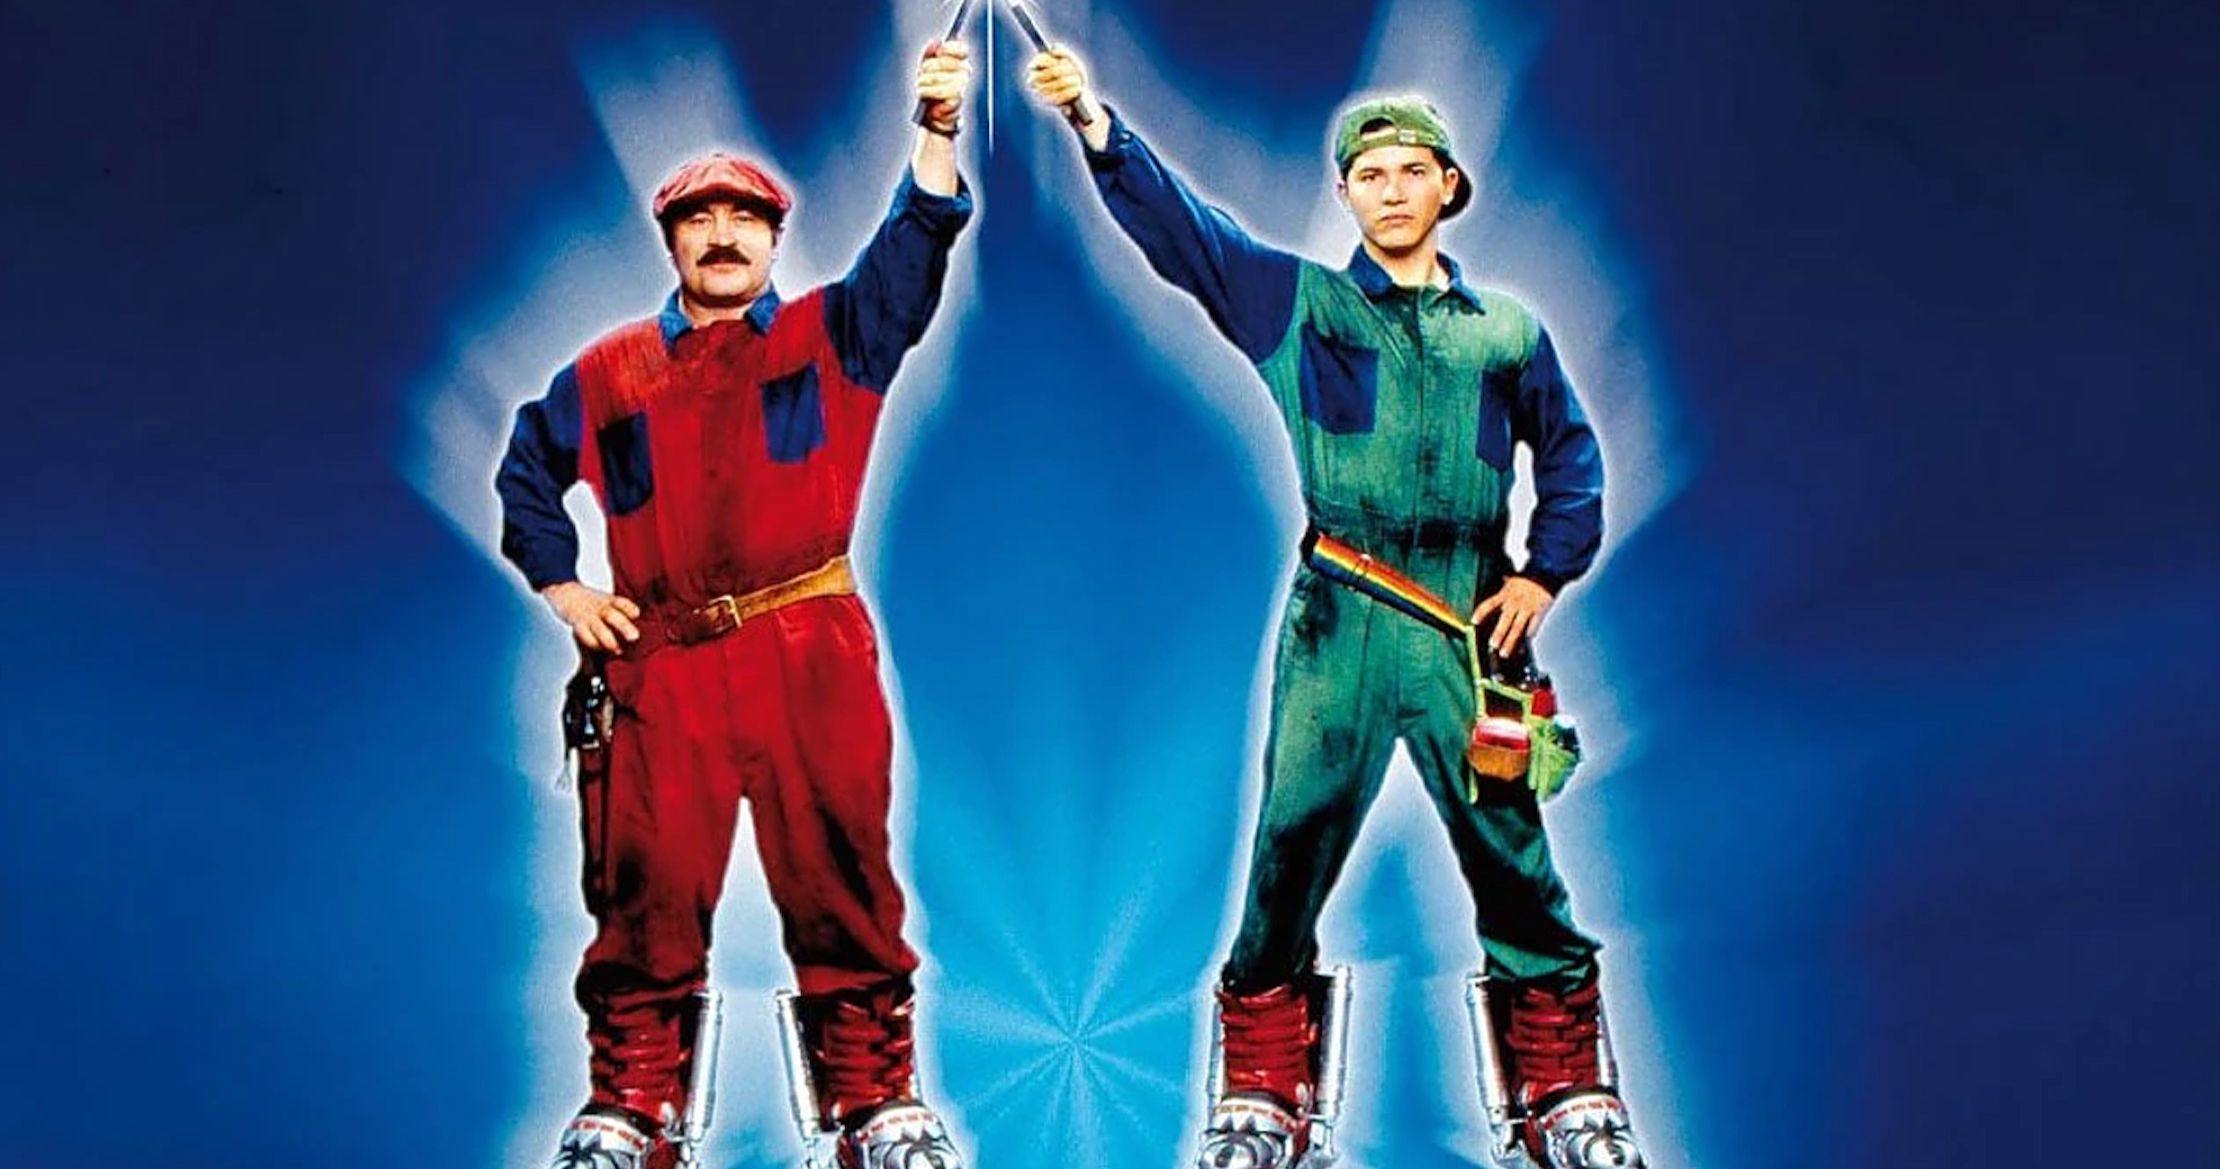 Super Mario Bros. Movie Extended Cut with 20 Minutes of New Footage Arrives Free Online